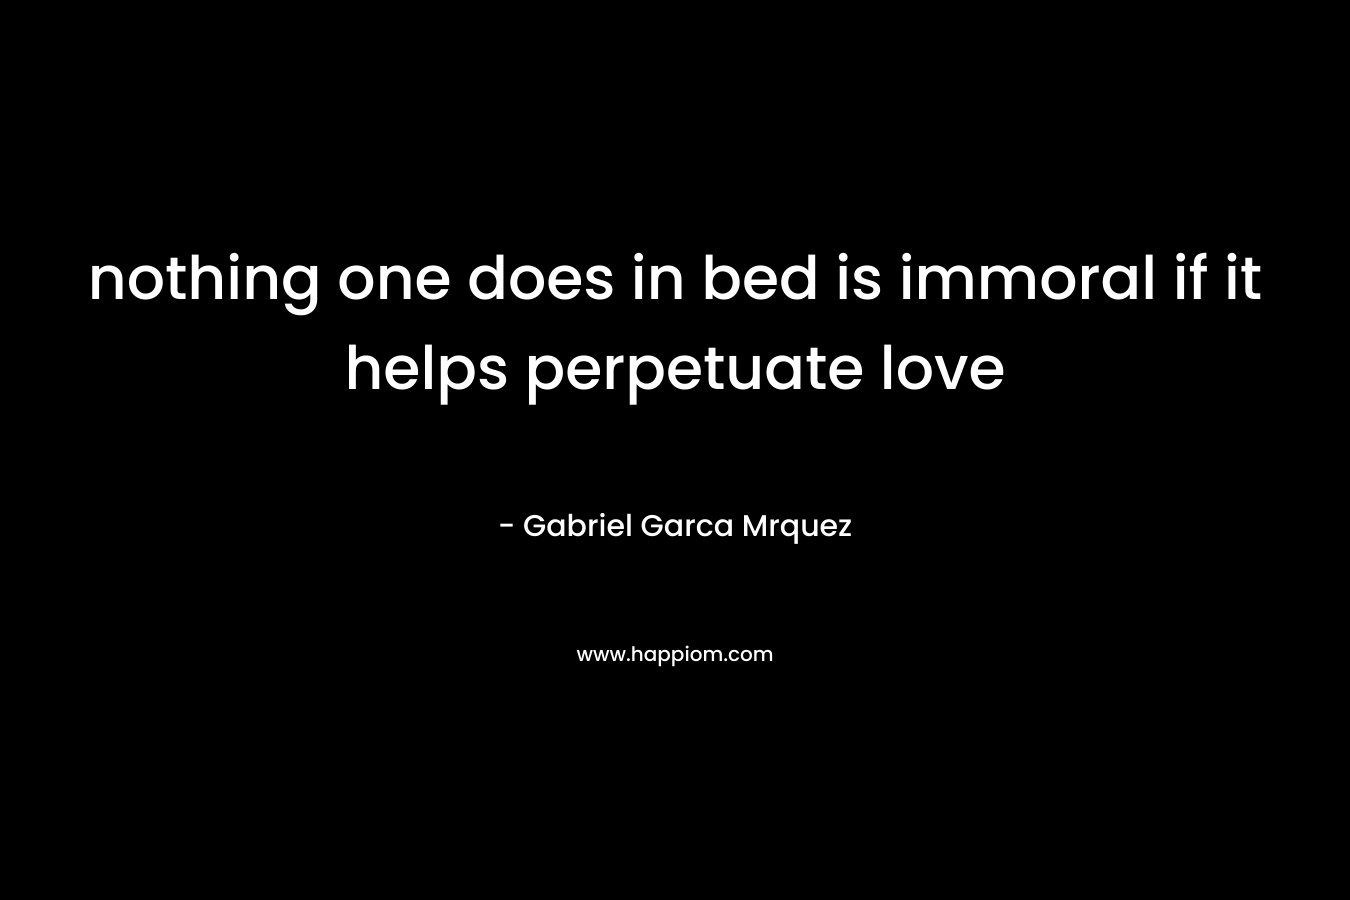 nothing one does in bed is immoral if it helps perpetuate love